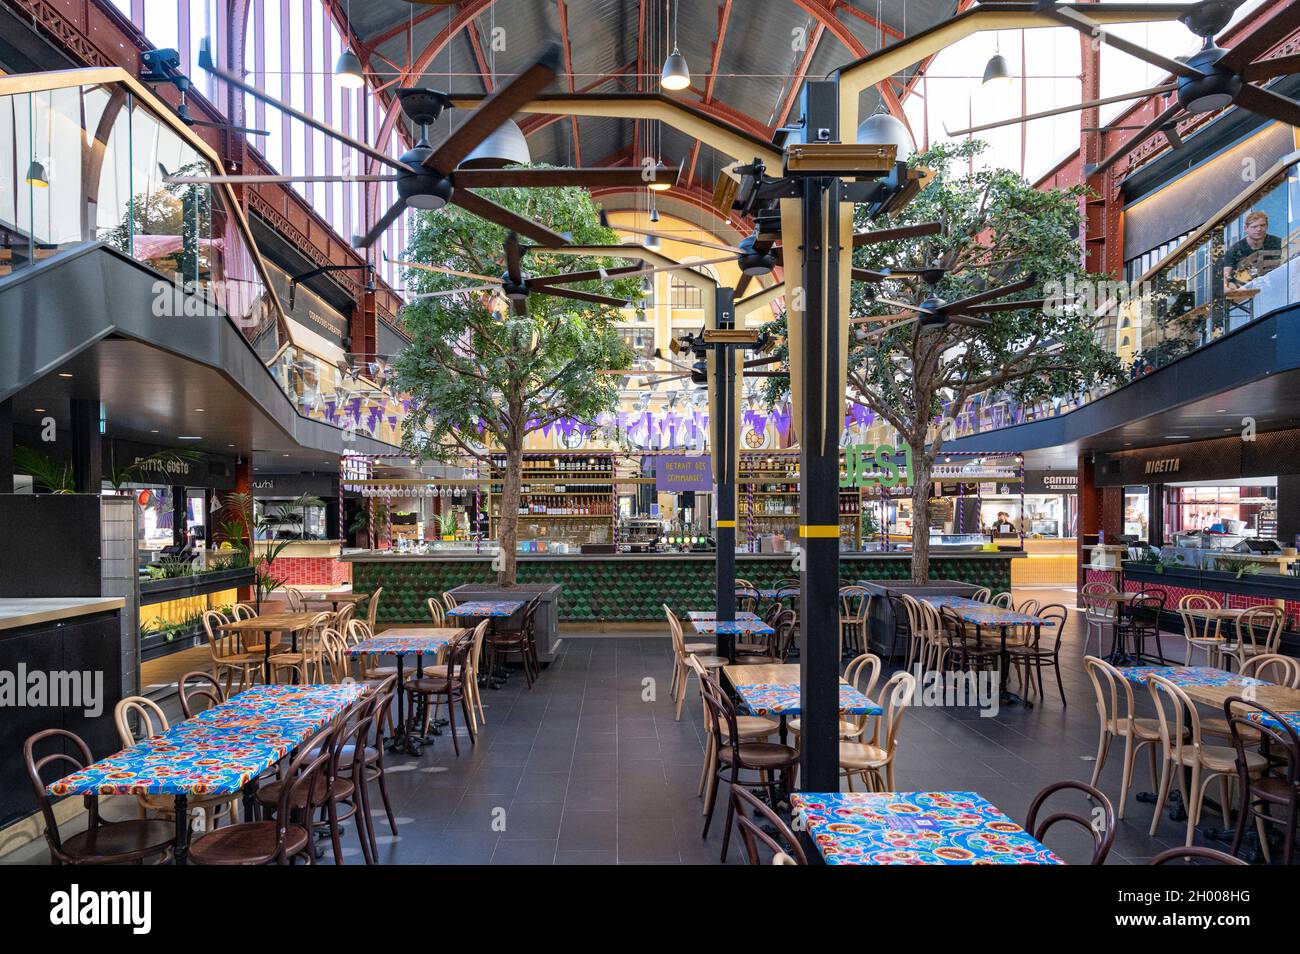 The former train Gare du Sud station has been converted into a food court in Nice, France Stock Photo